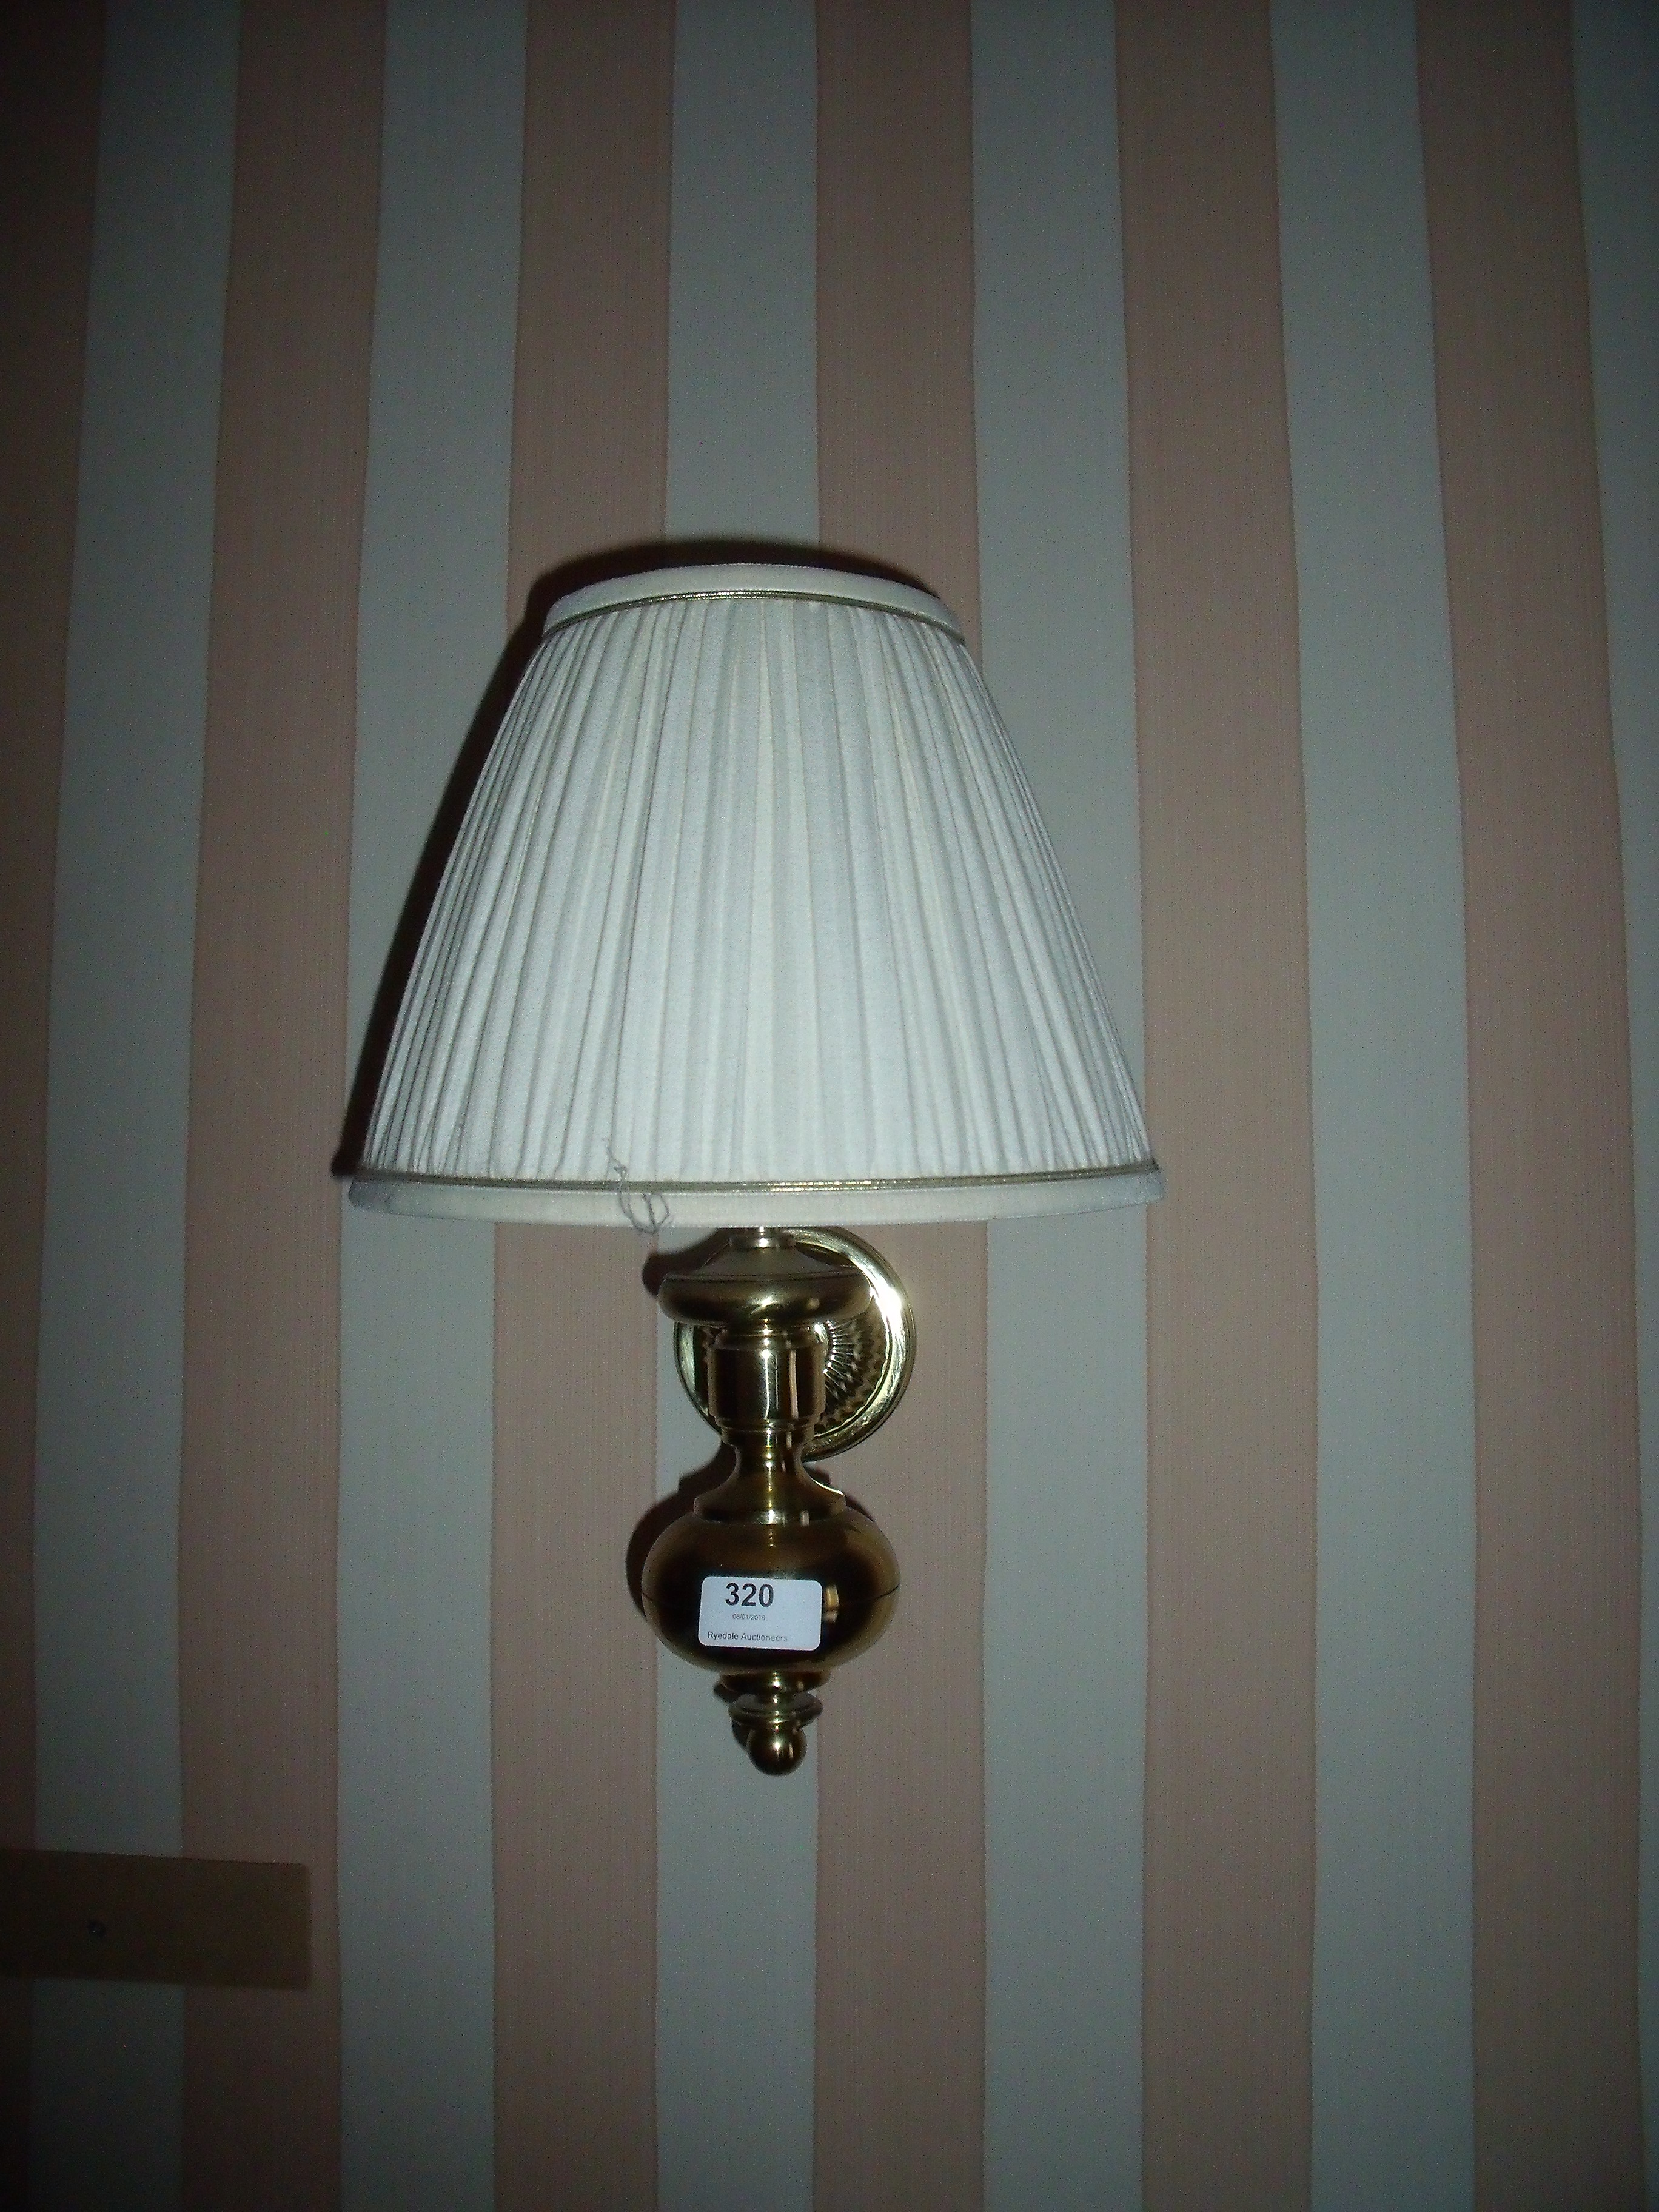 Four wall mounted brass wall lights (room 31)